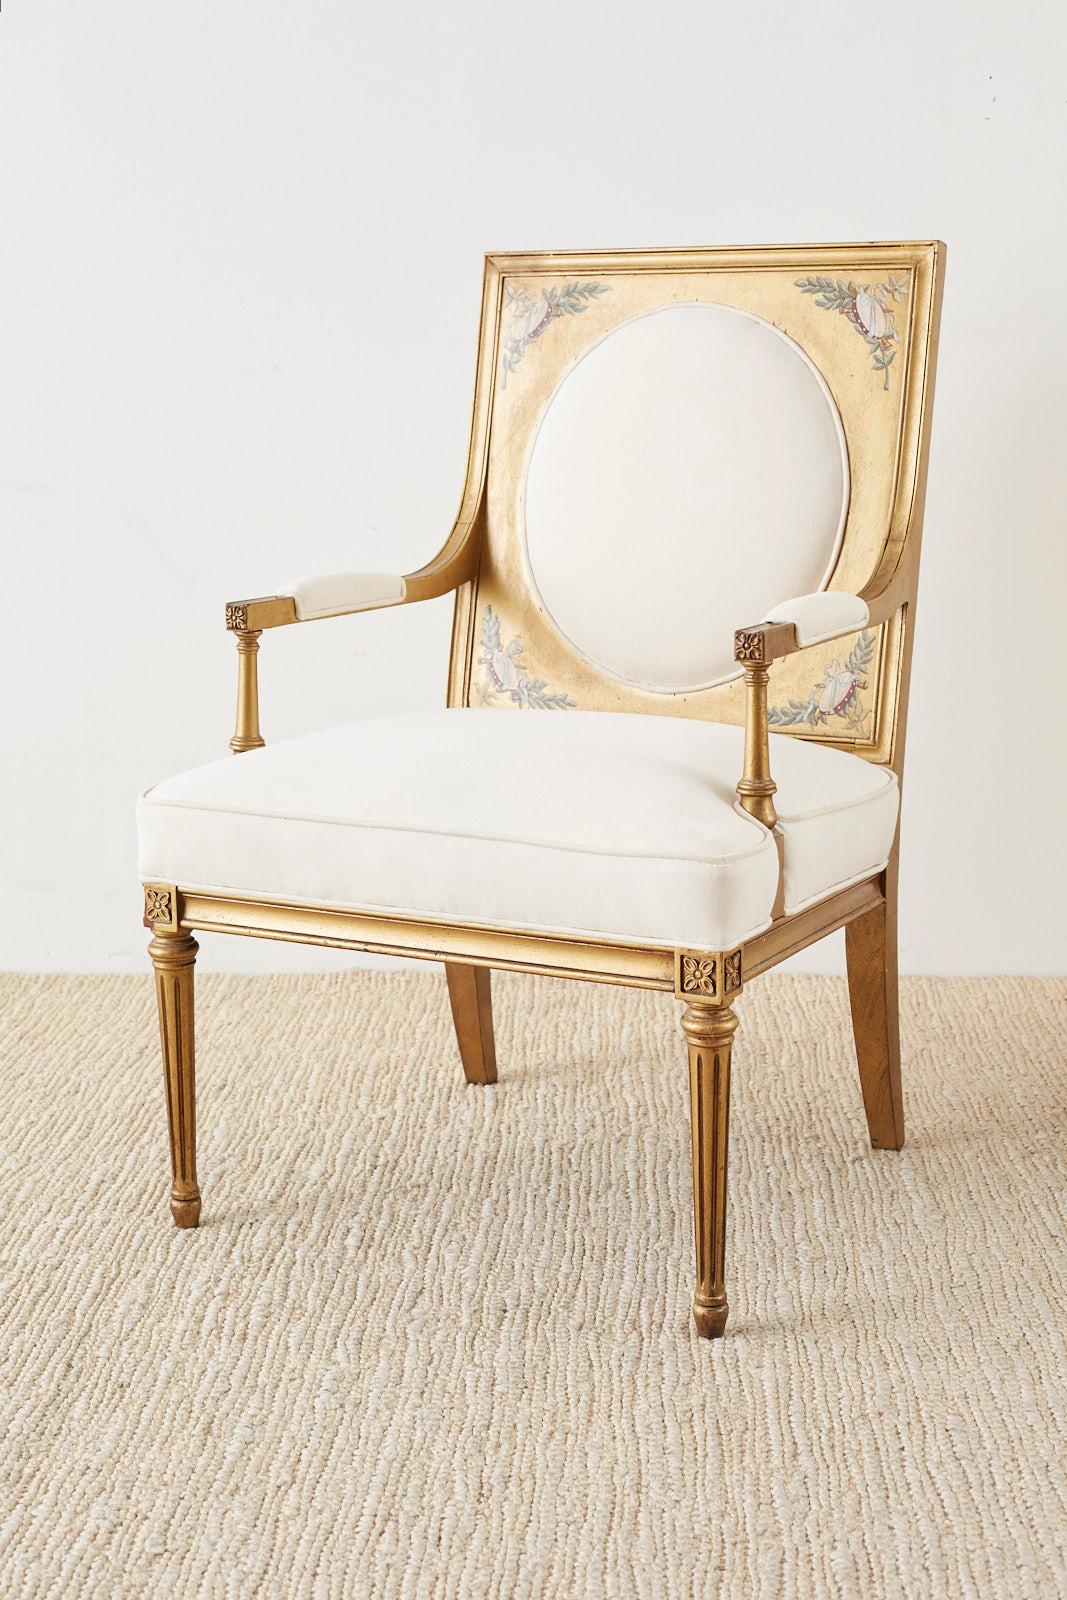 Lacquer Pair of Louis XVI Swedish Gustavian Style Gilt Armchairs